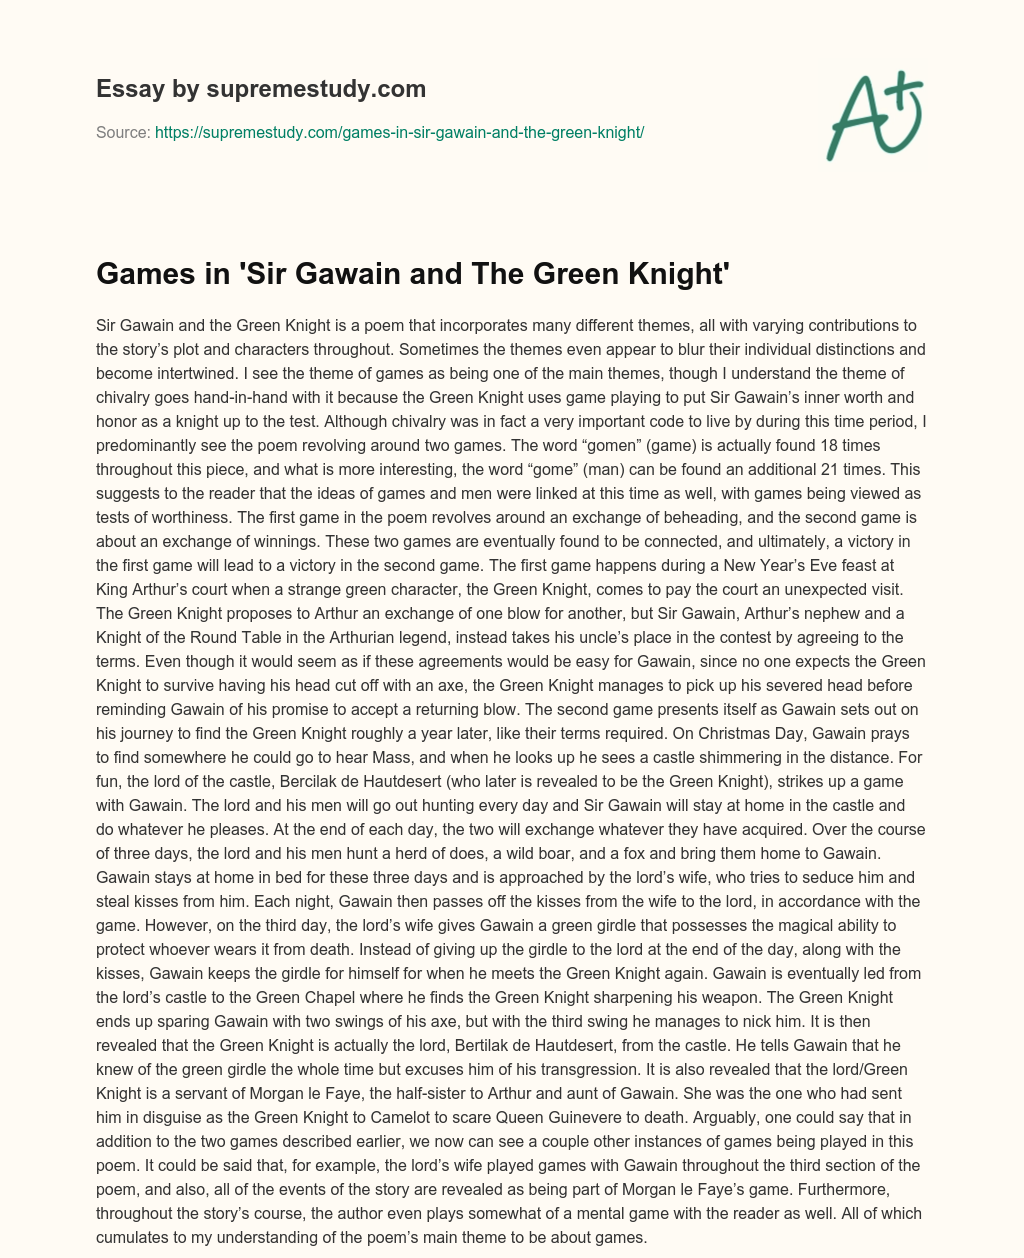 Games in ‘Sir Gawain and The Green Knight’ essay